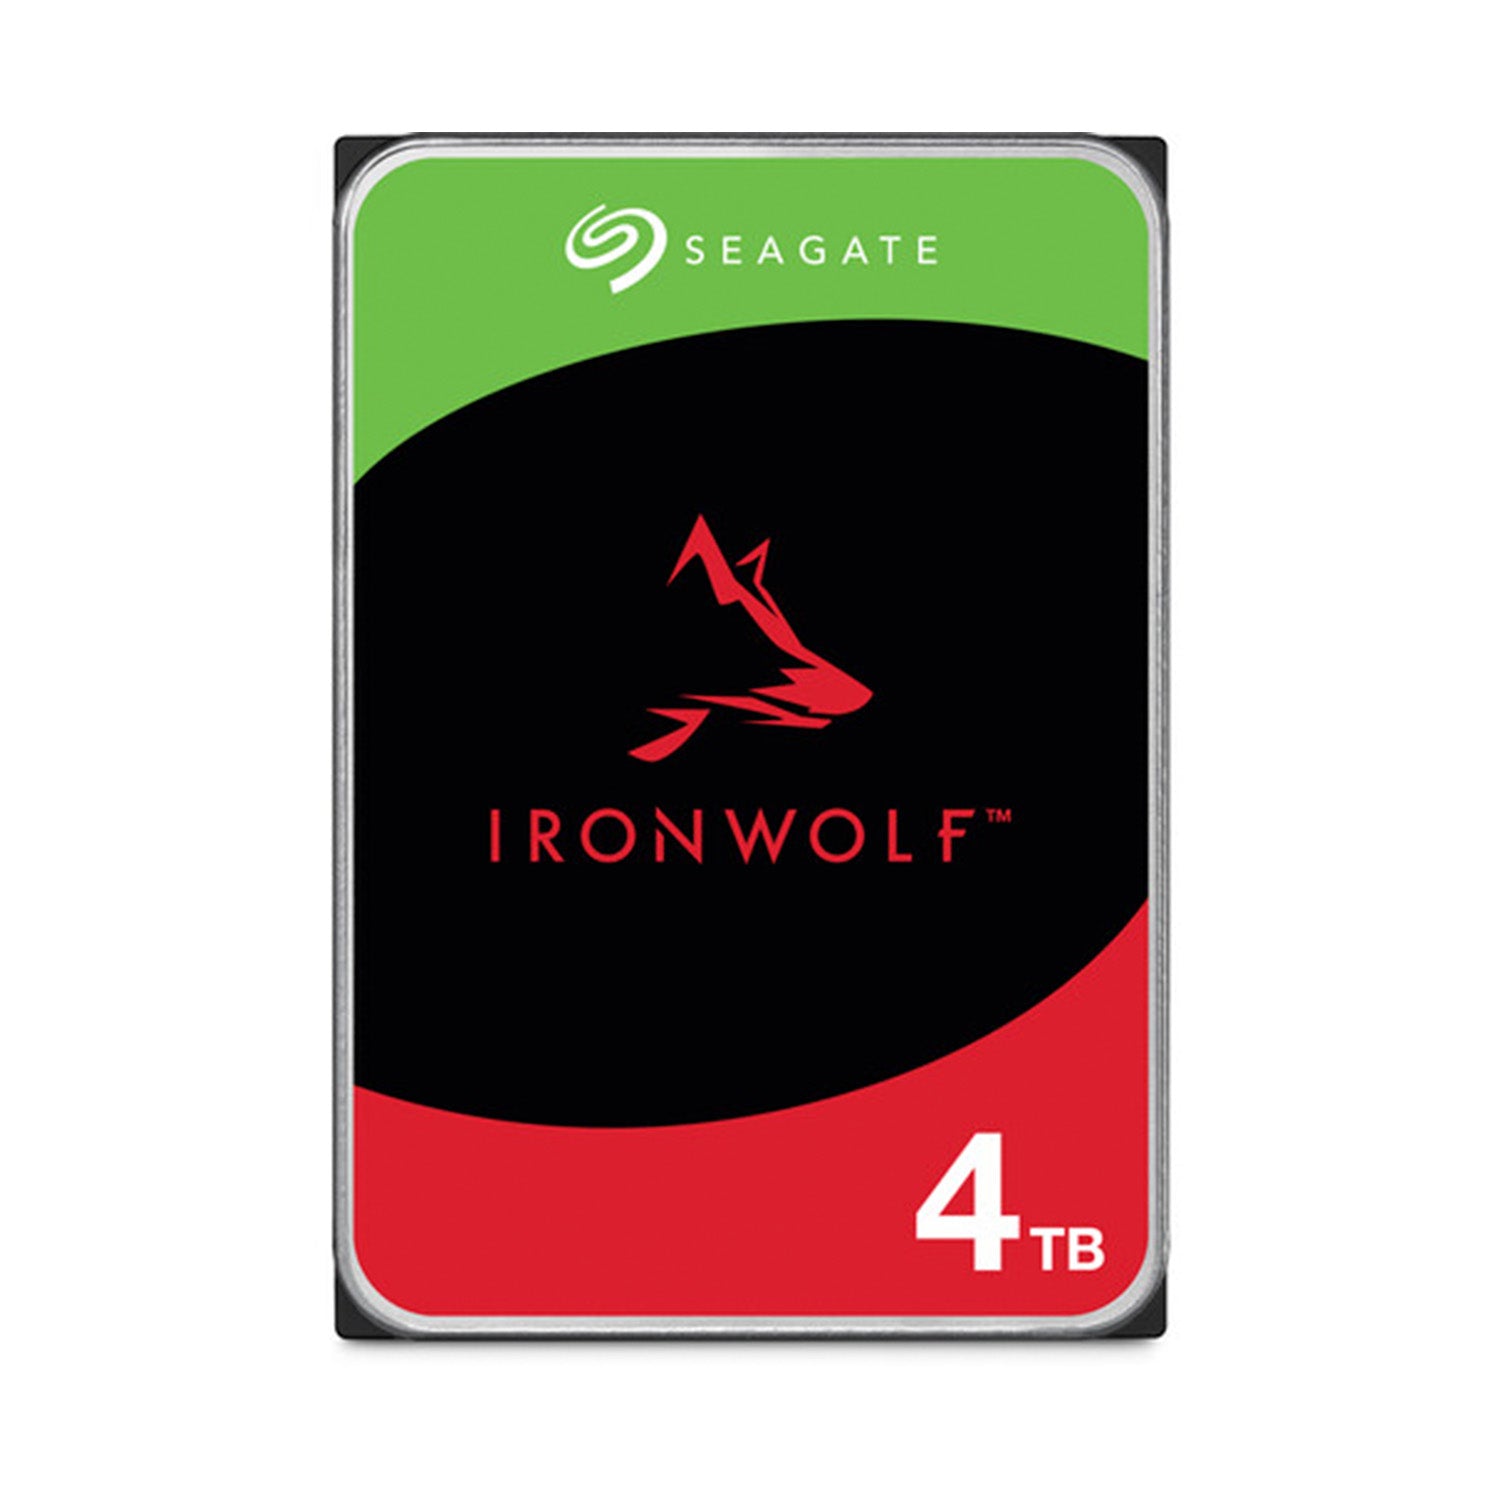 Seagate Ironwolf 4TB HDD Internal Hard Drive (3.5 Inch) SATA 6 Gb/s, 5.4K RPM 256 MB Cache - High performance for Computer Desktop PC (ST4000VN006)